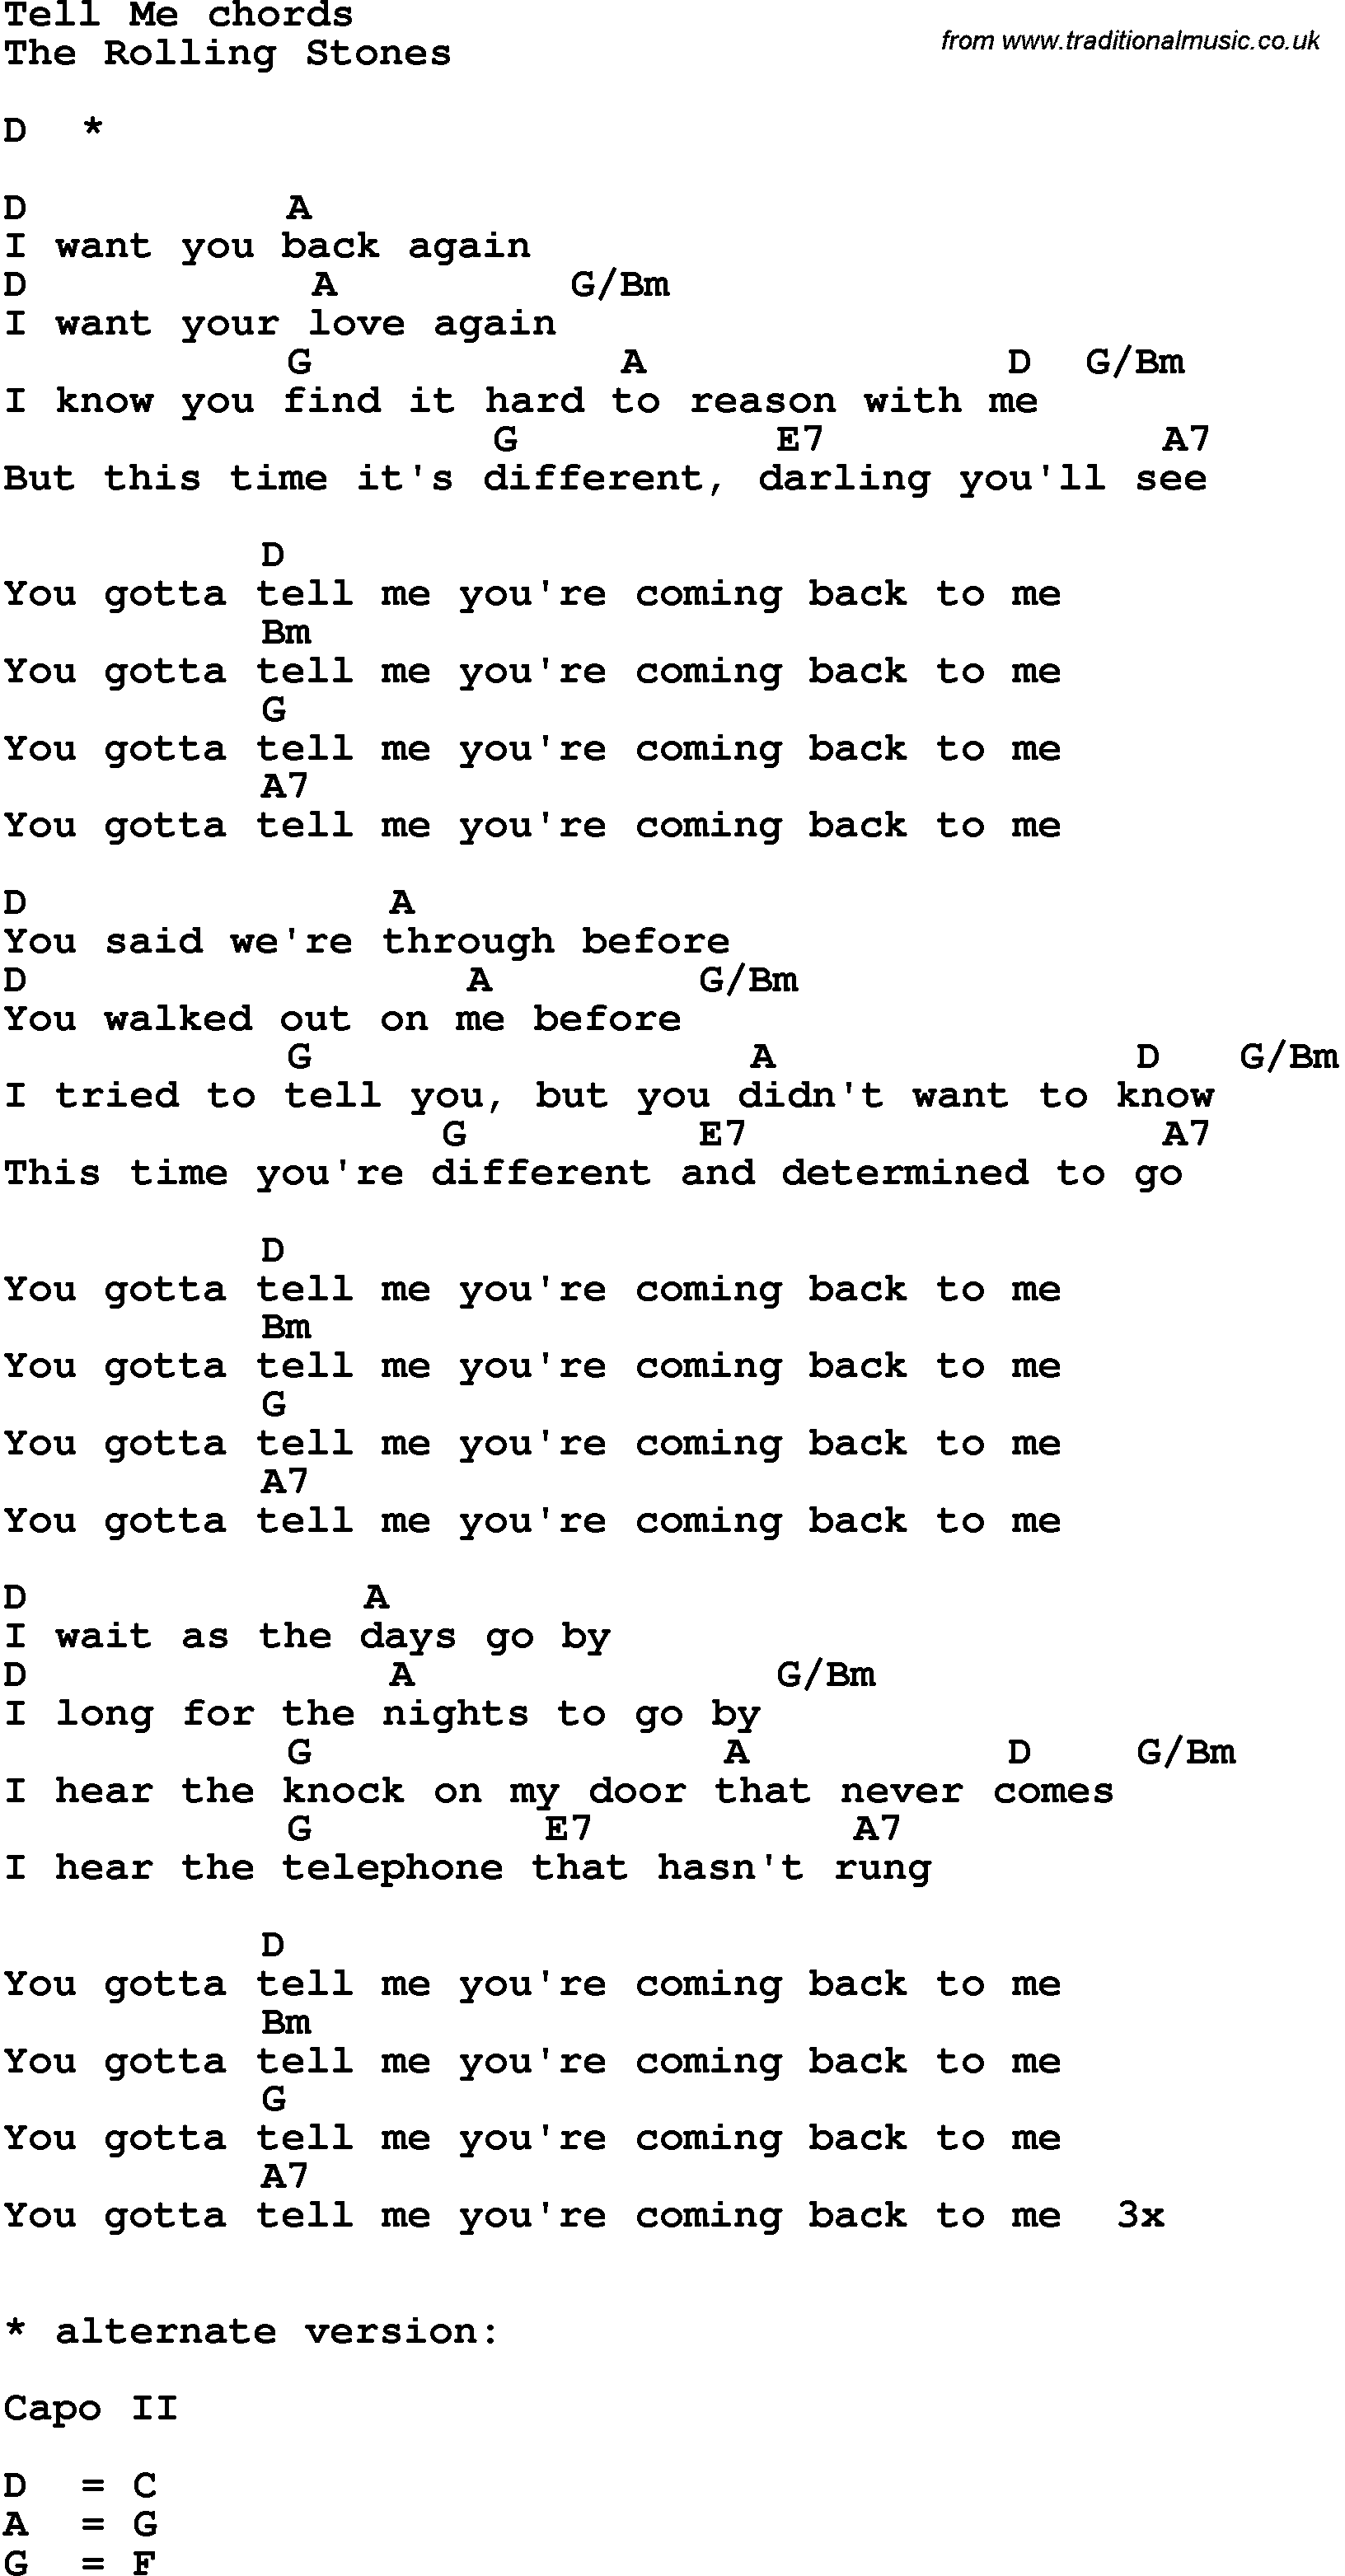 Song Lyrics with guitar chords for Tell Me - The Rolling Stones